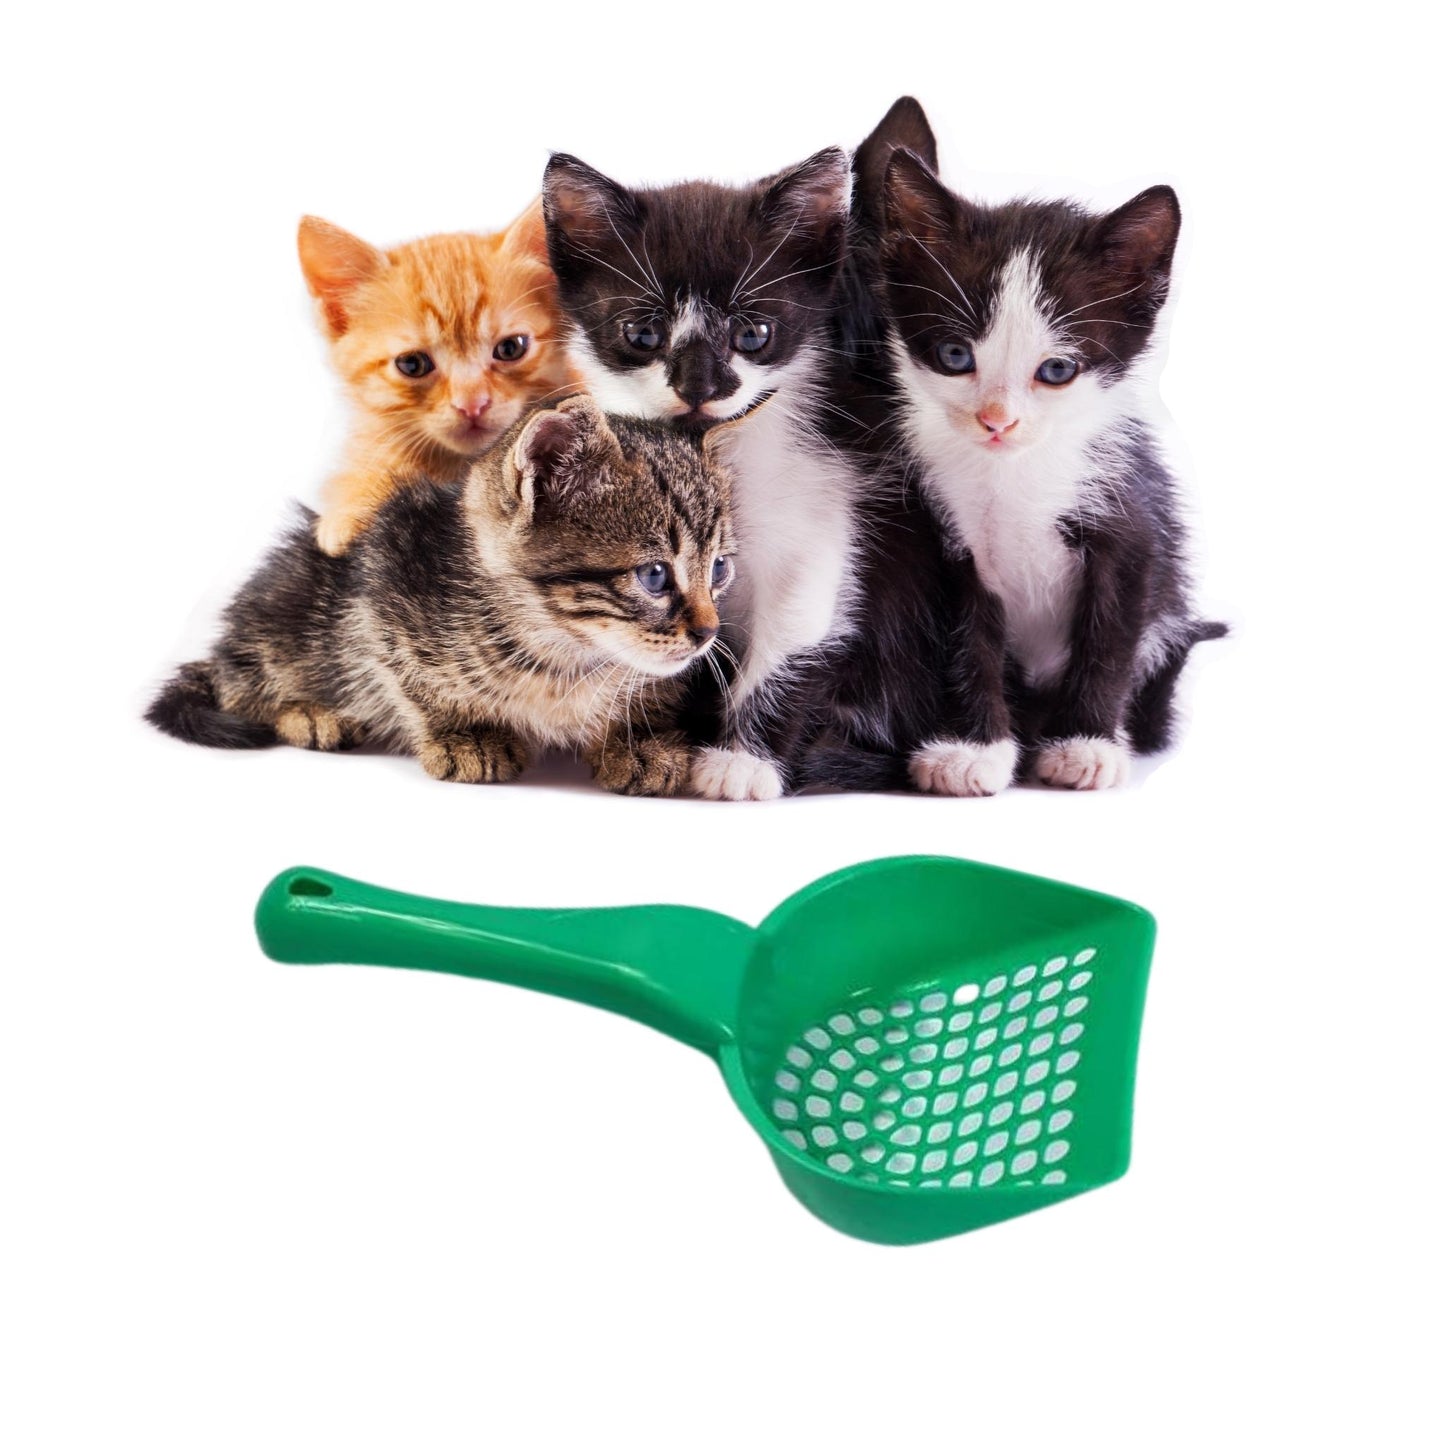 Foodie Puppies Litter/Poop Scooper for Cats & Kittens (Color May Vary)